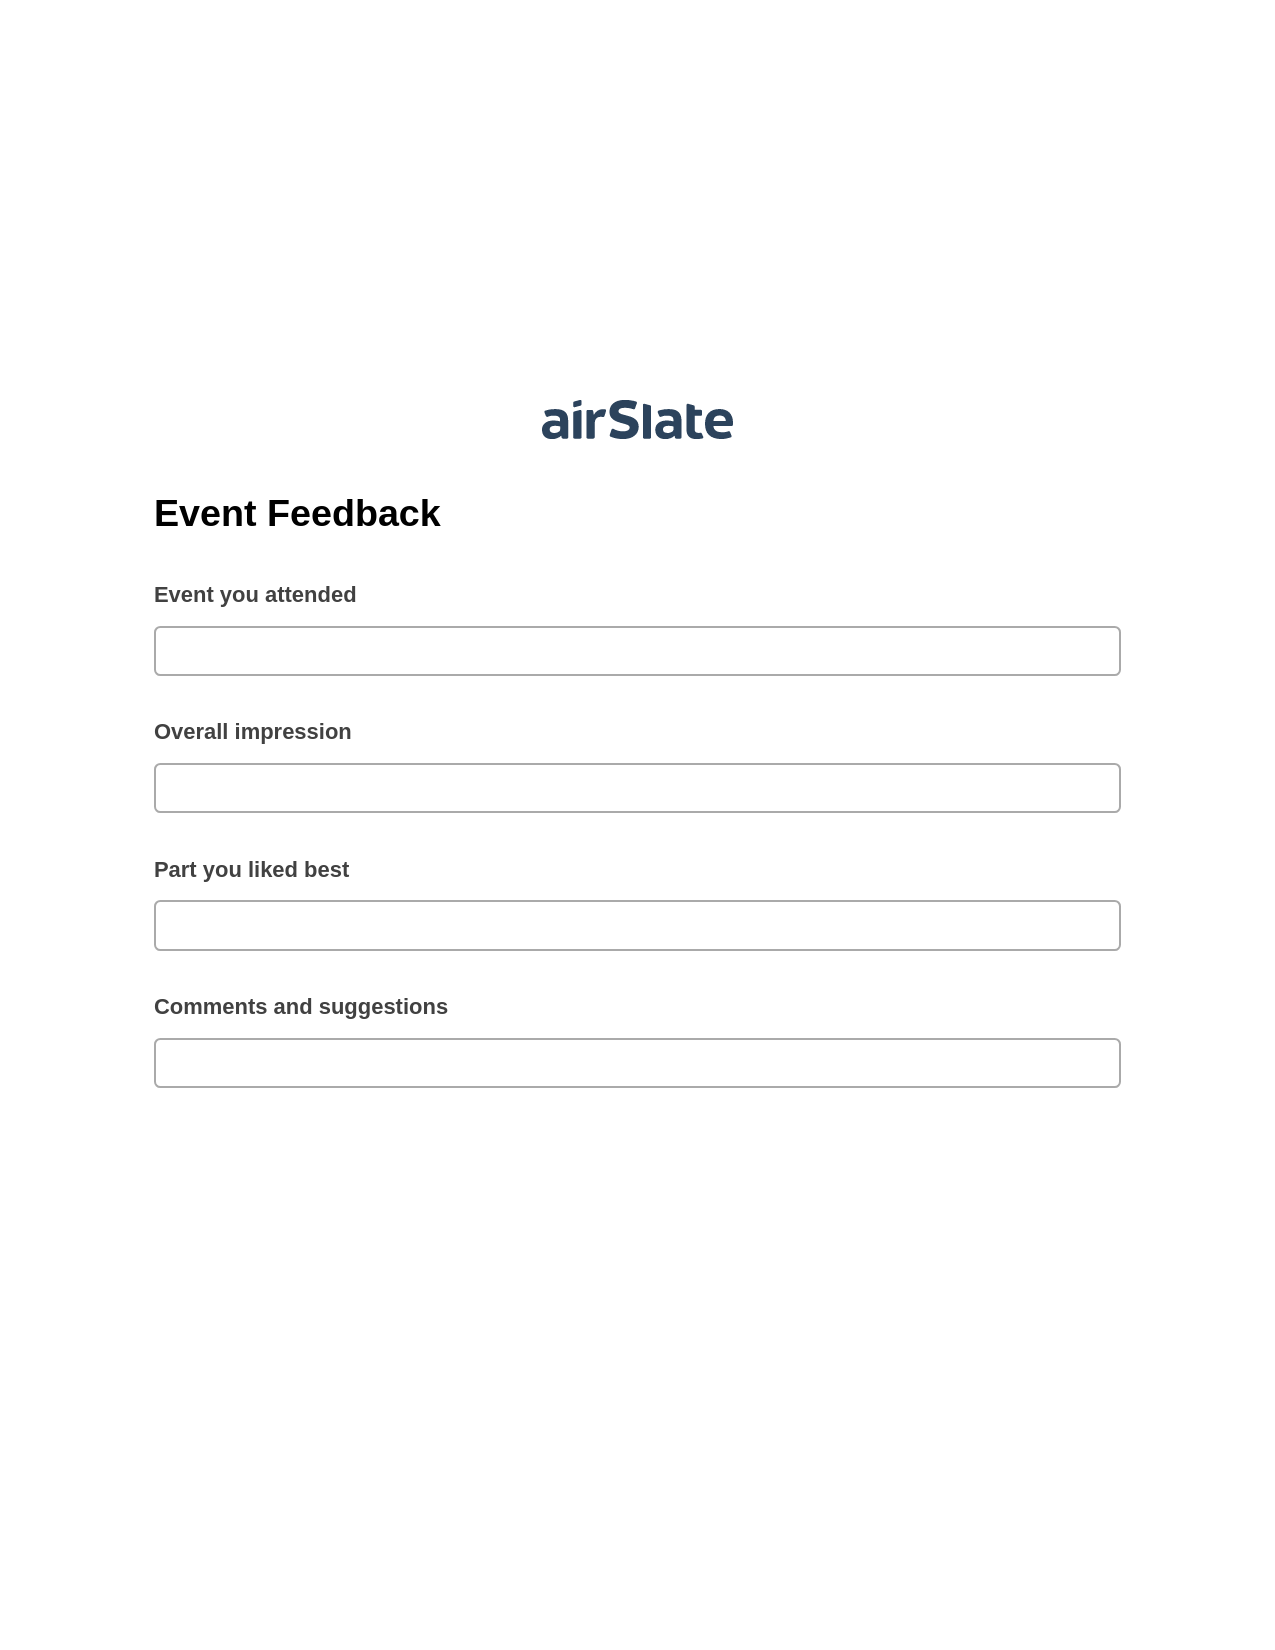 Multirole Event Feedback Pre-fill Slate from MS Dynamics 365 Records Bot, Slack Notification Bot, Export to Excel 365 Bot